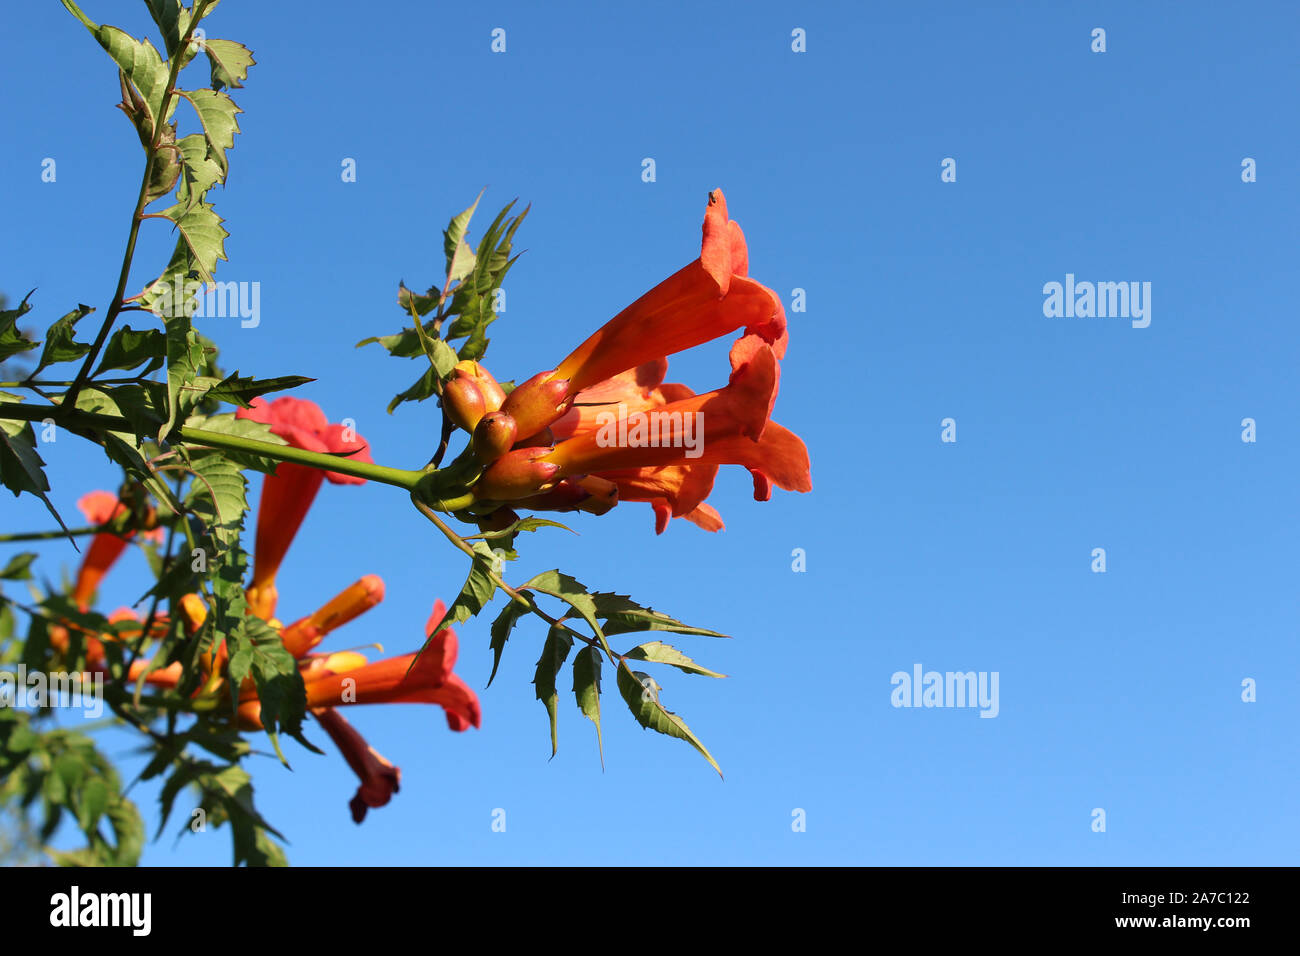 Exotic bright orange Campsis radicans flowers, also known as trumpet vine, against a background of blue sky, with copyspace. Stock Photo